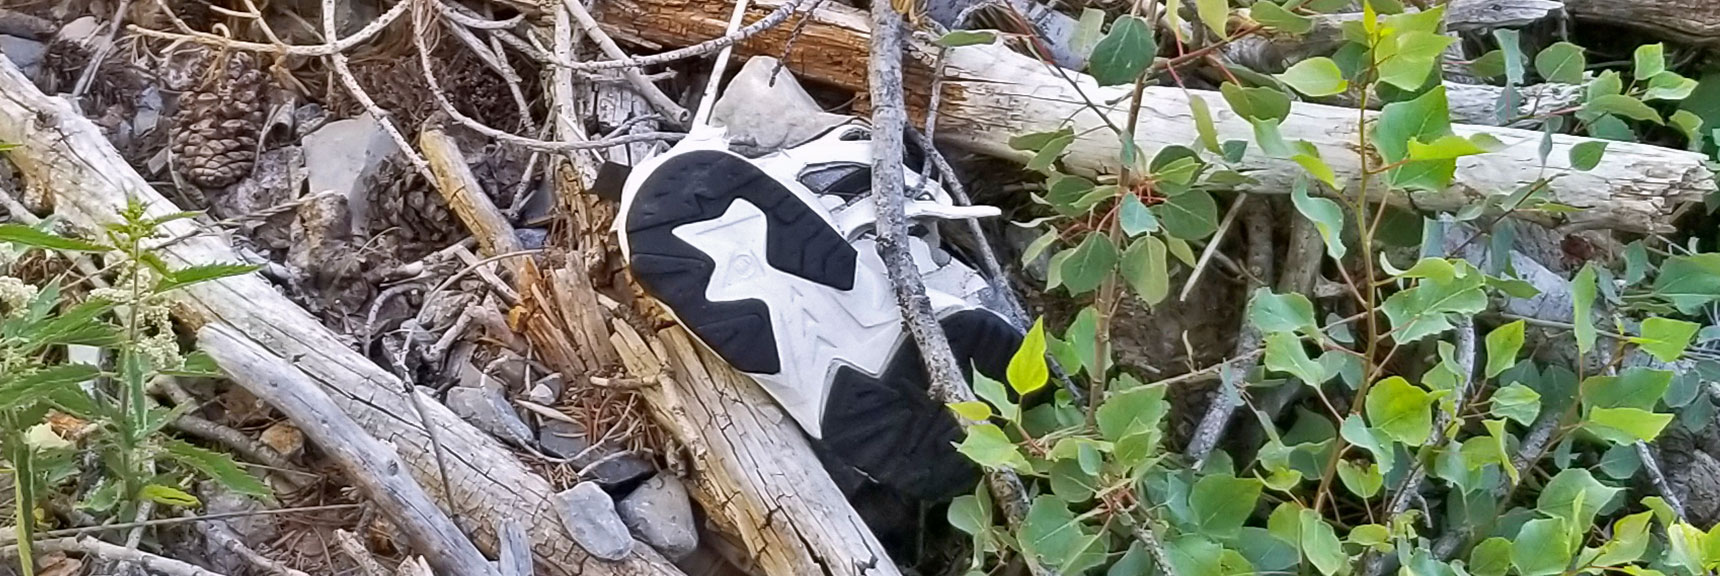 Lone Shoe Left Behind by a Hiker | Cathedral Rock to South Ridge Kyle Canyon Summit, Nevada